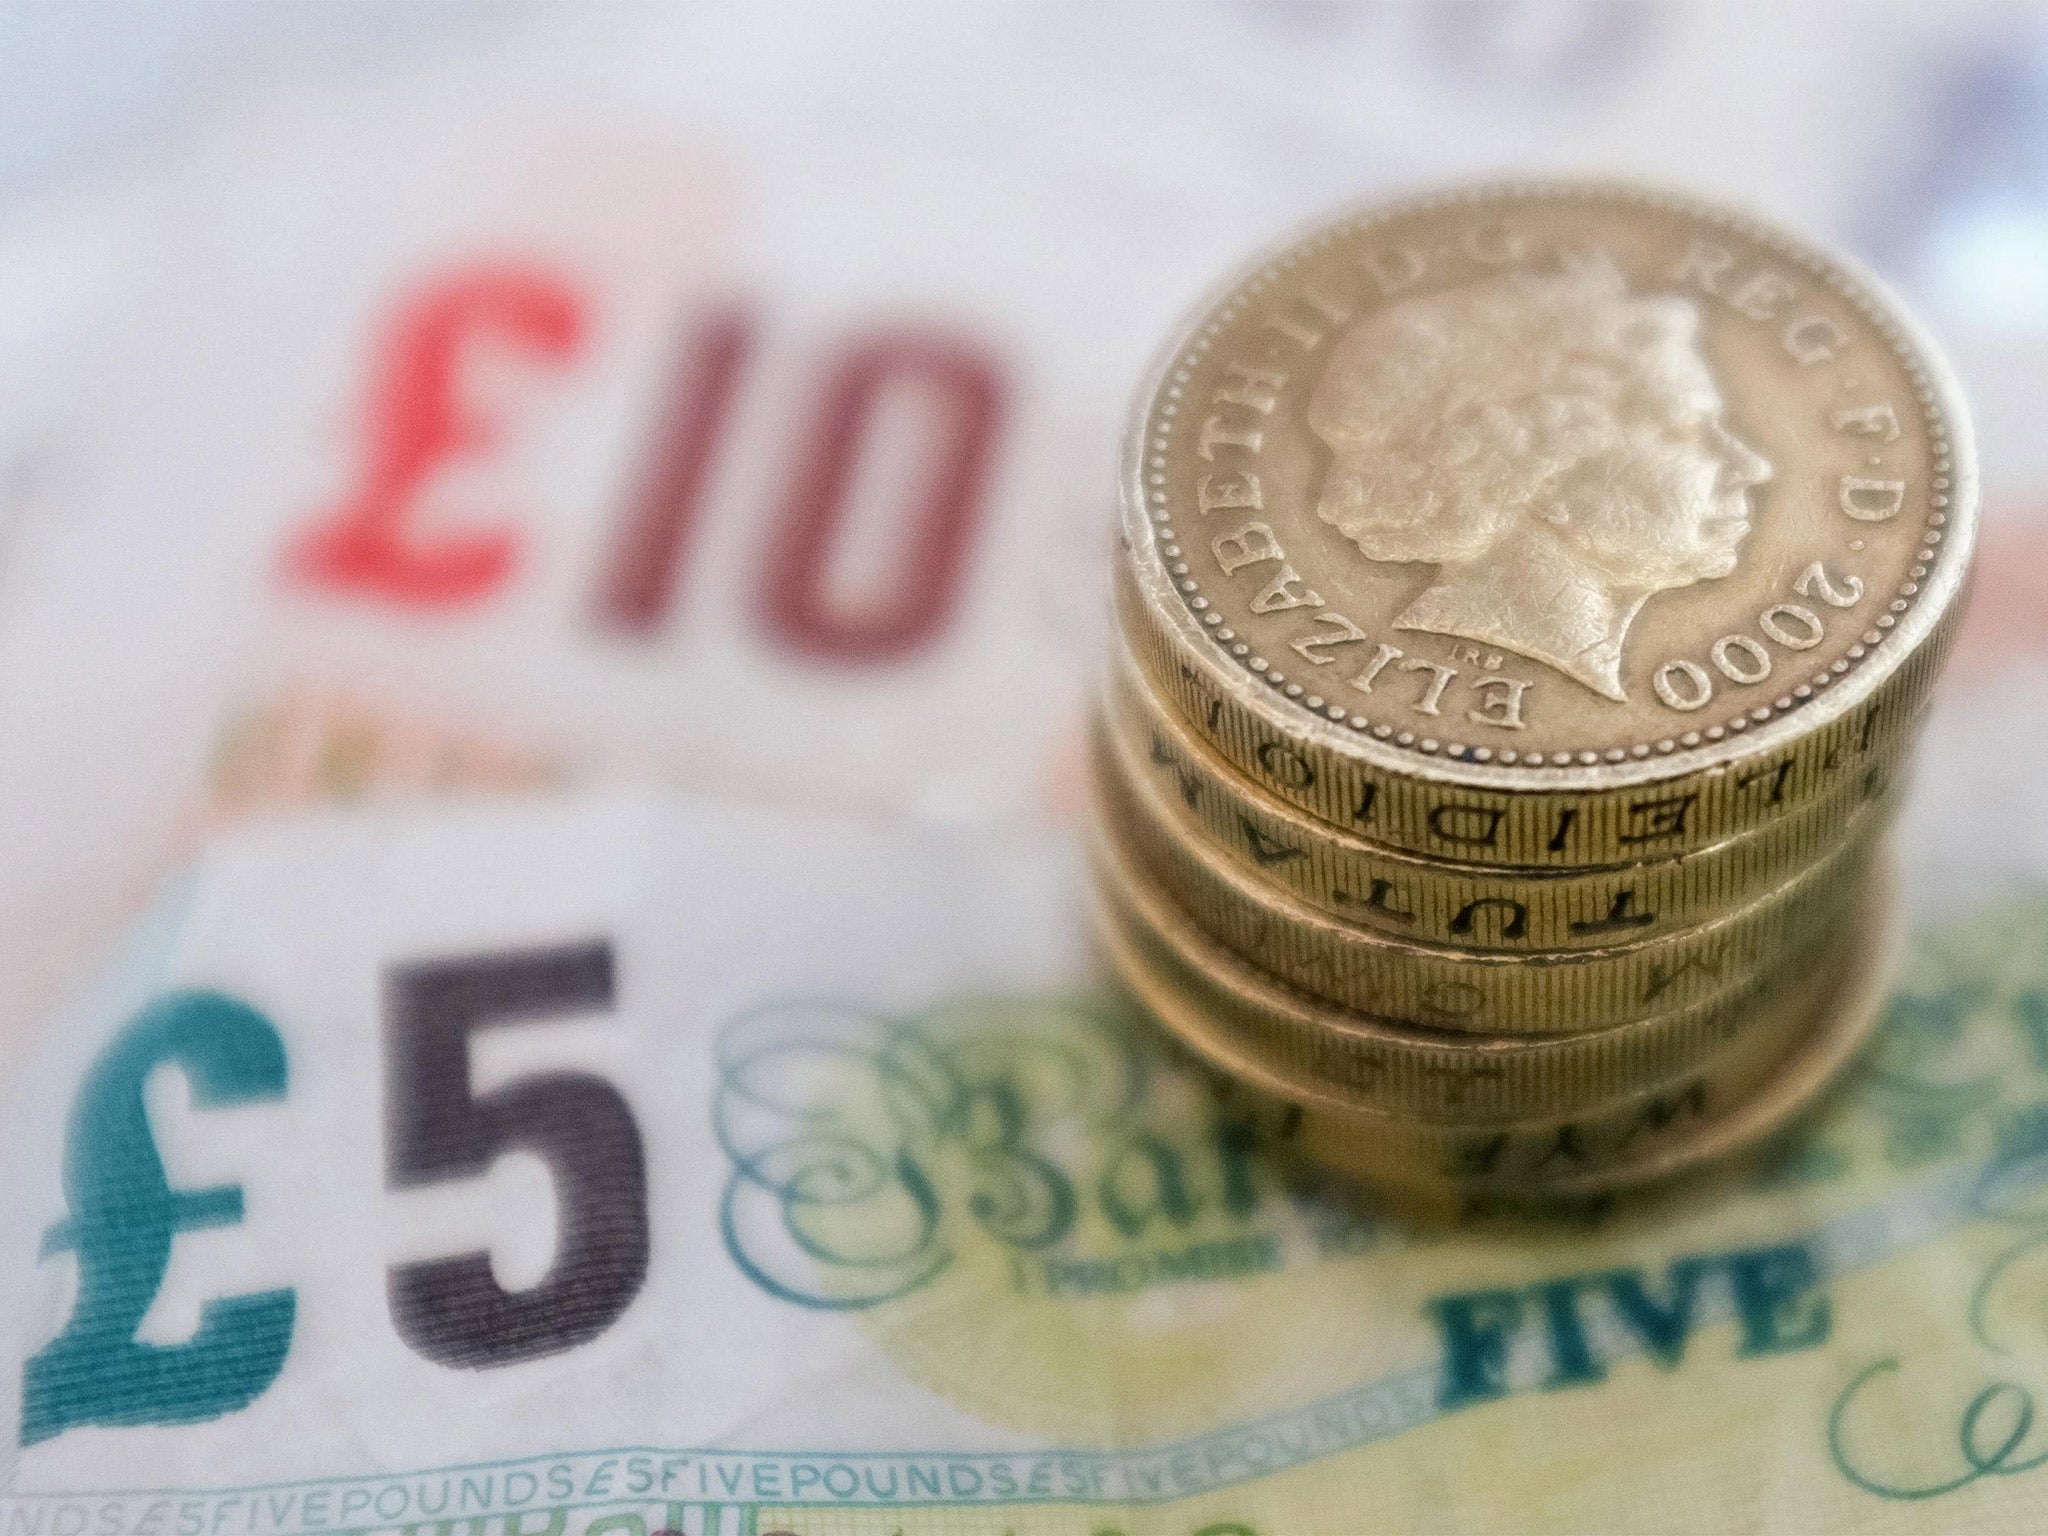 The income tax personal allowance threshold has gone up